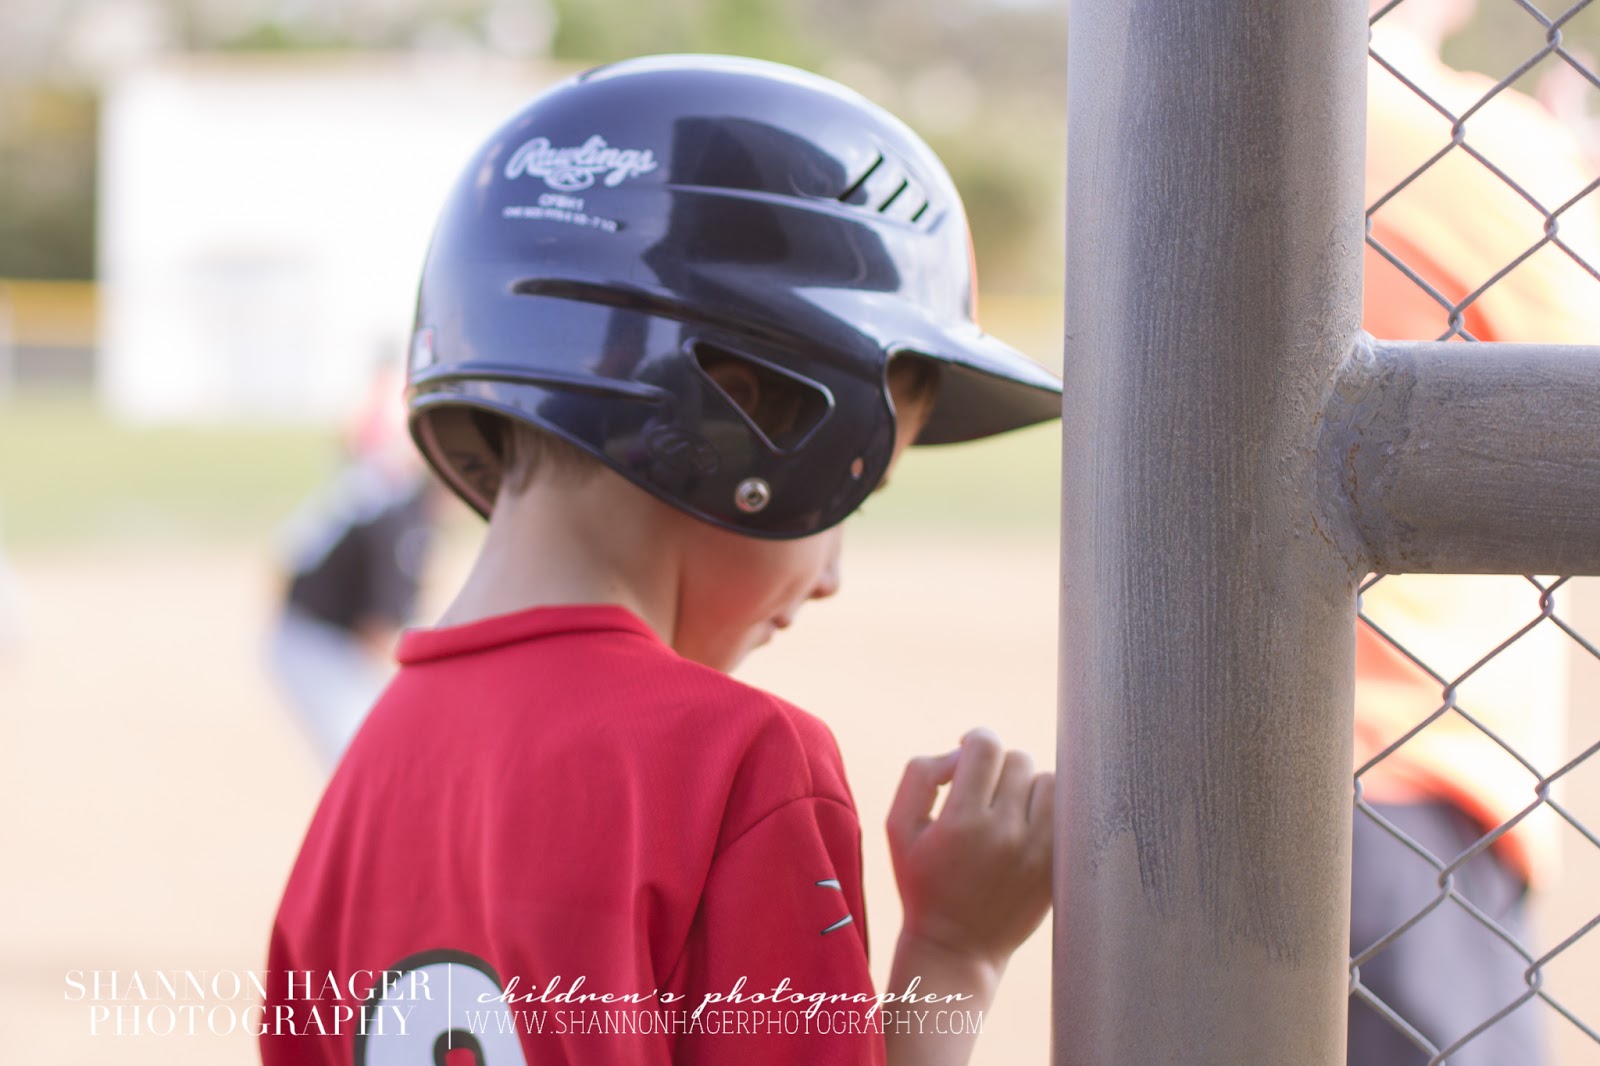 Children's Photography by Shannon Hager Photography, baseball